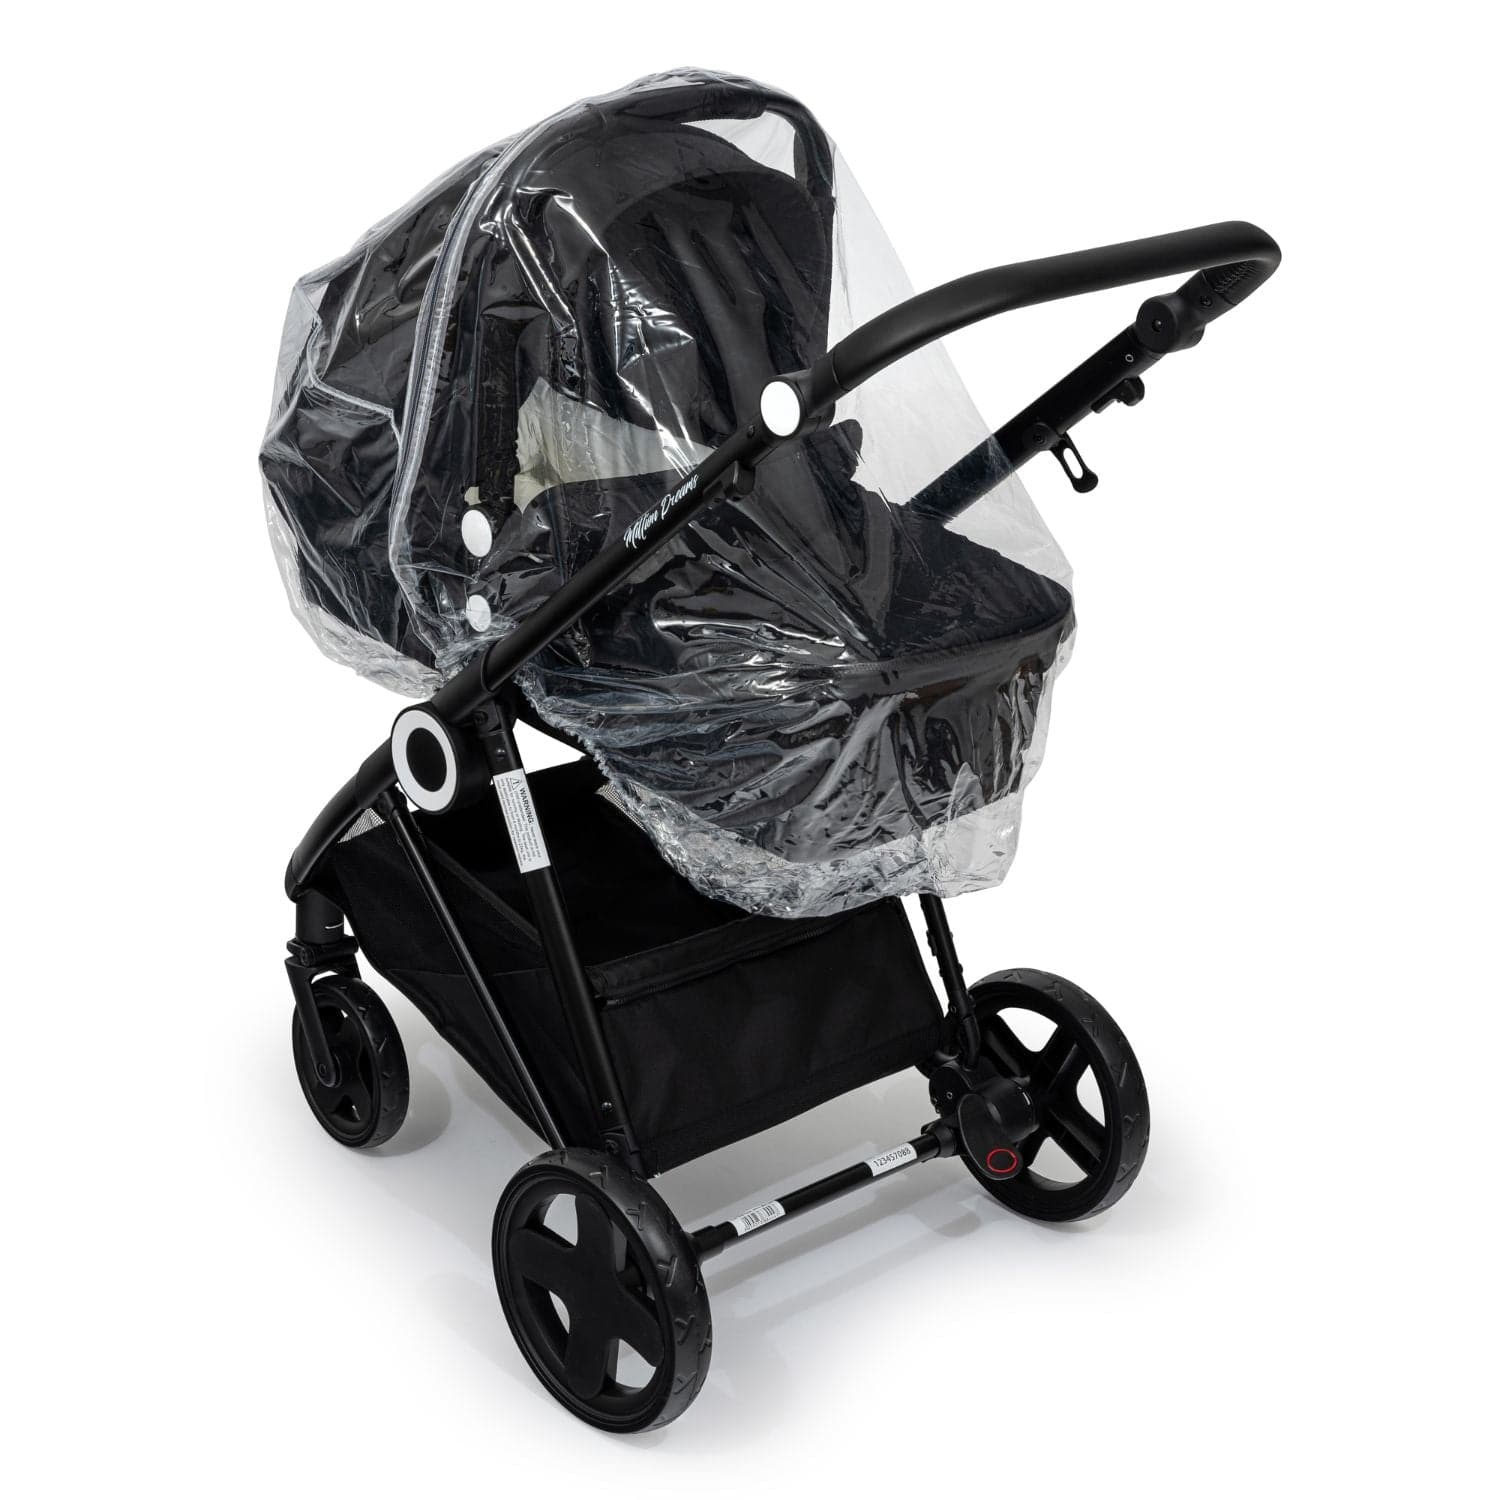 Carrycot Raincover Compatible With Bloom - Fits All Models - For Your Little One